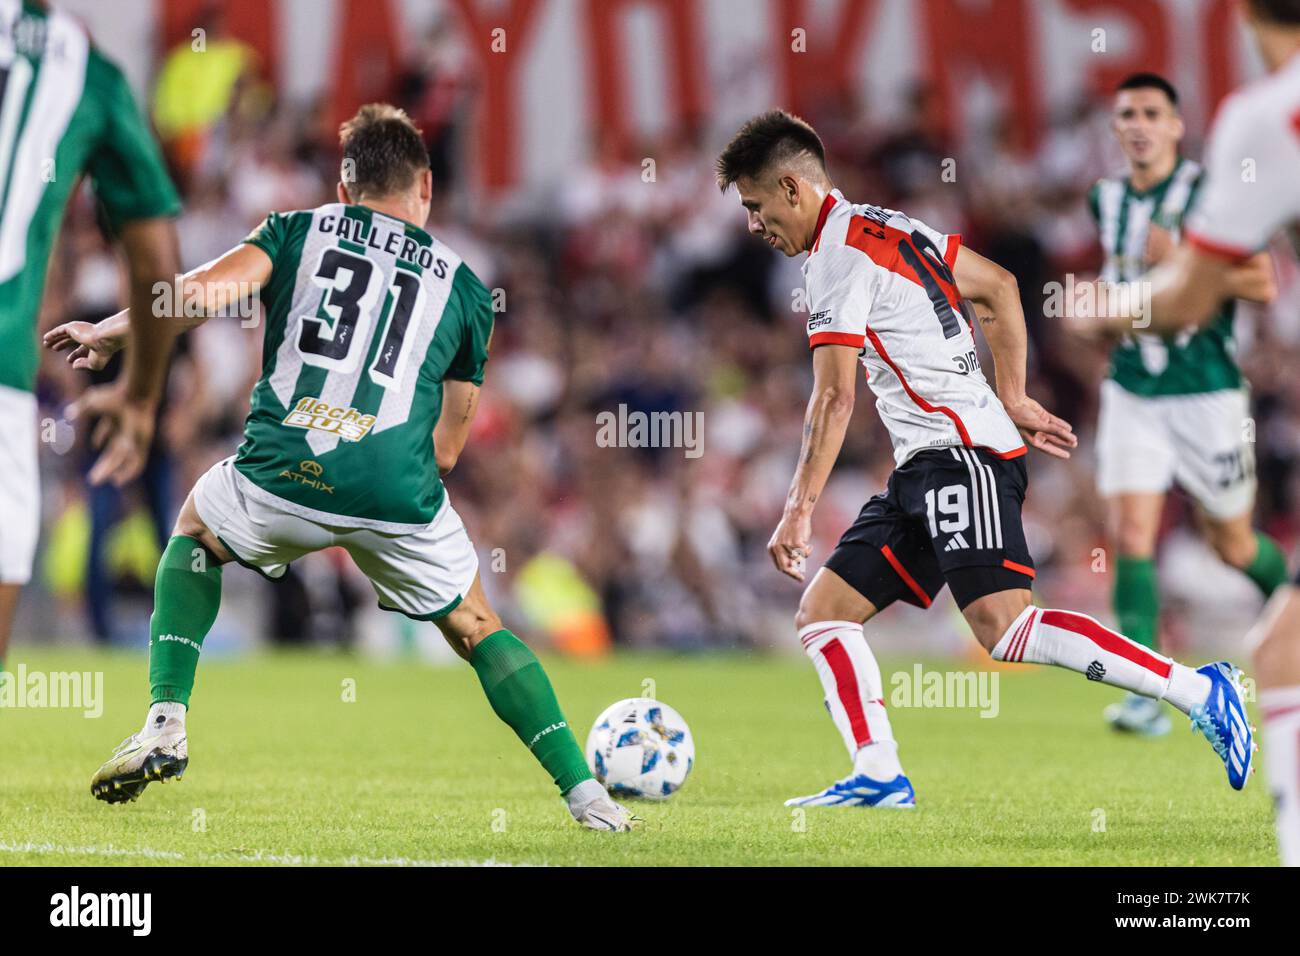 Claudio echeverri river plate hi-res stock photography and images - Alamy